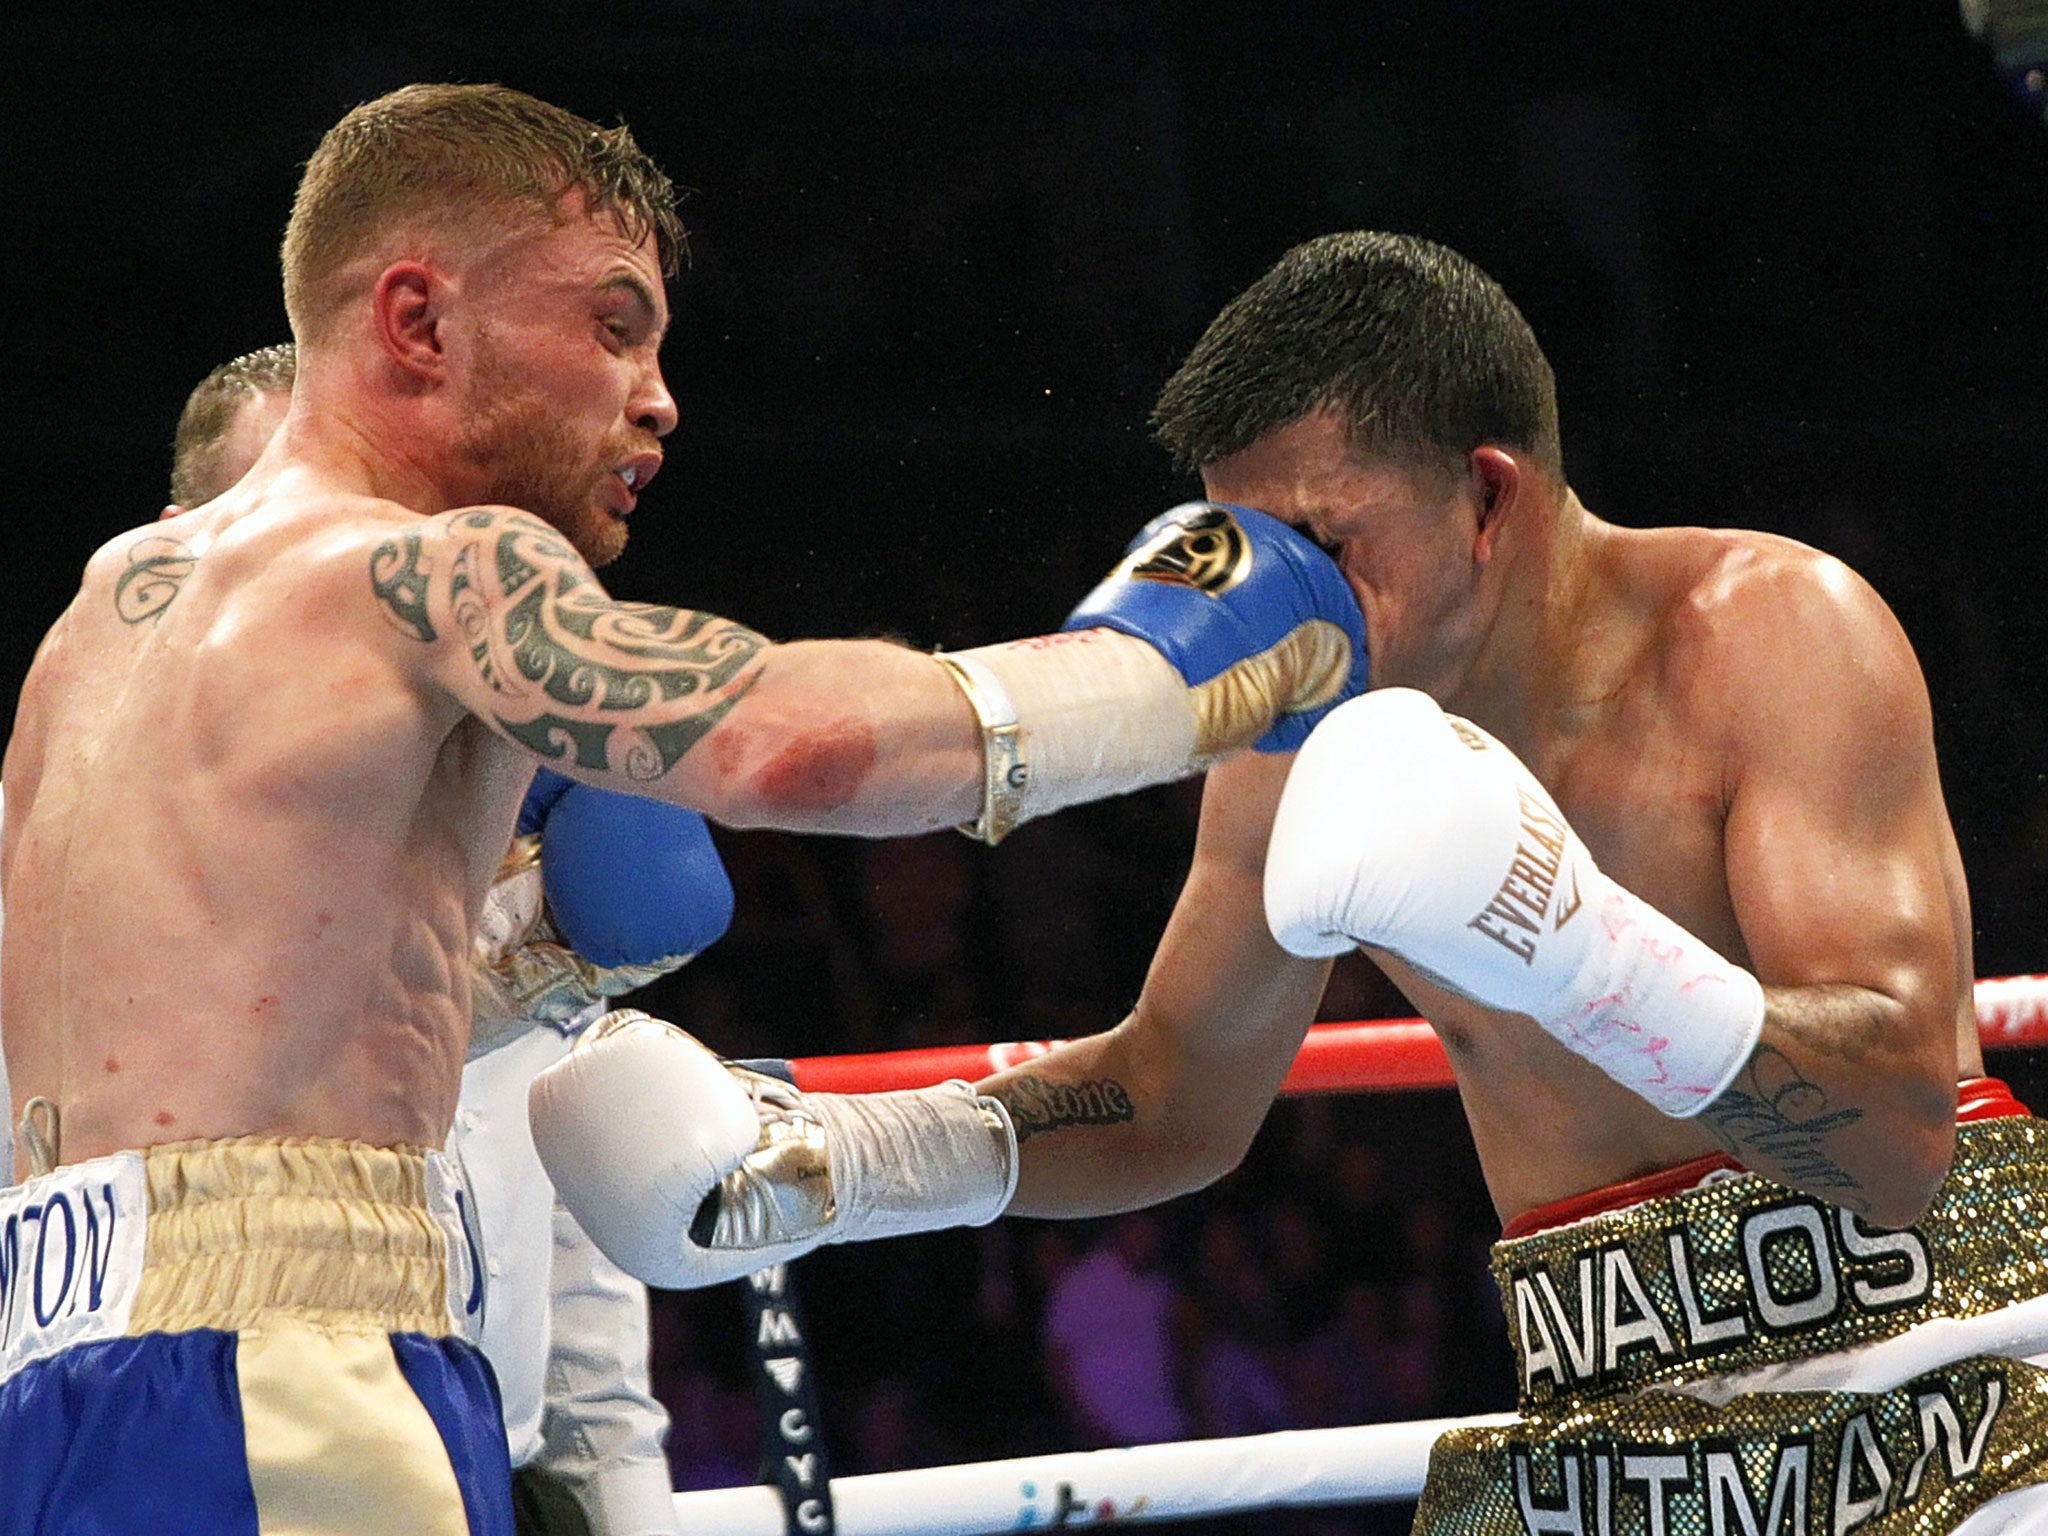 Carl Frampton lands a blow full in the face of Chris Avalos